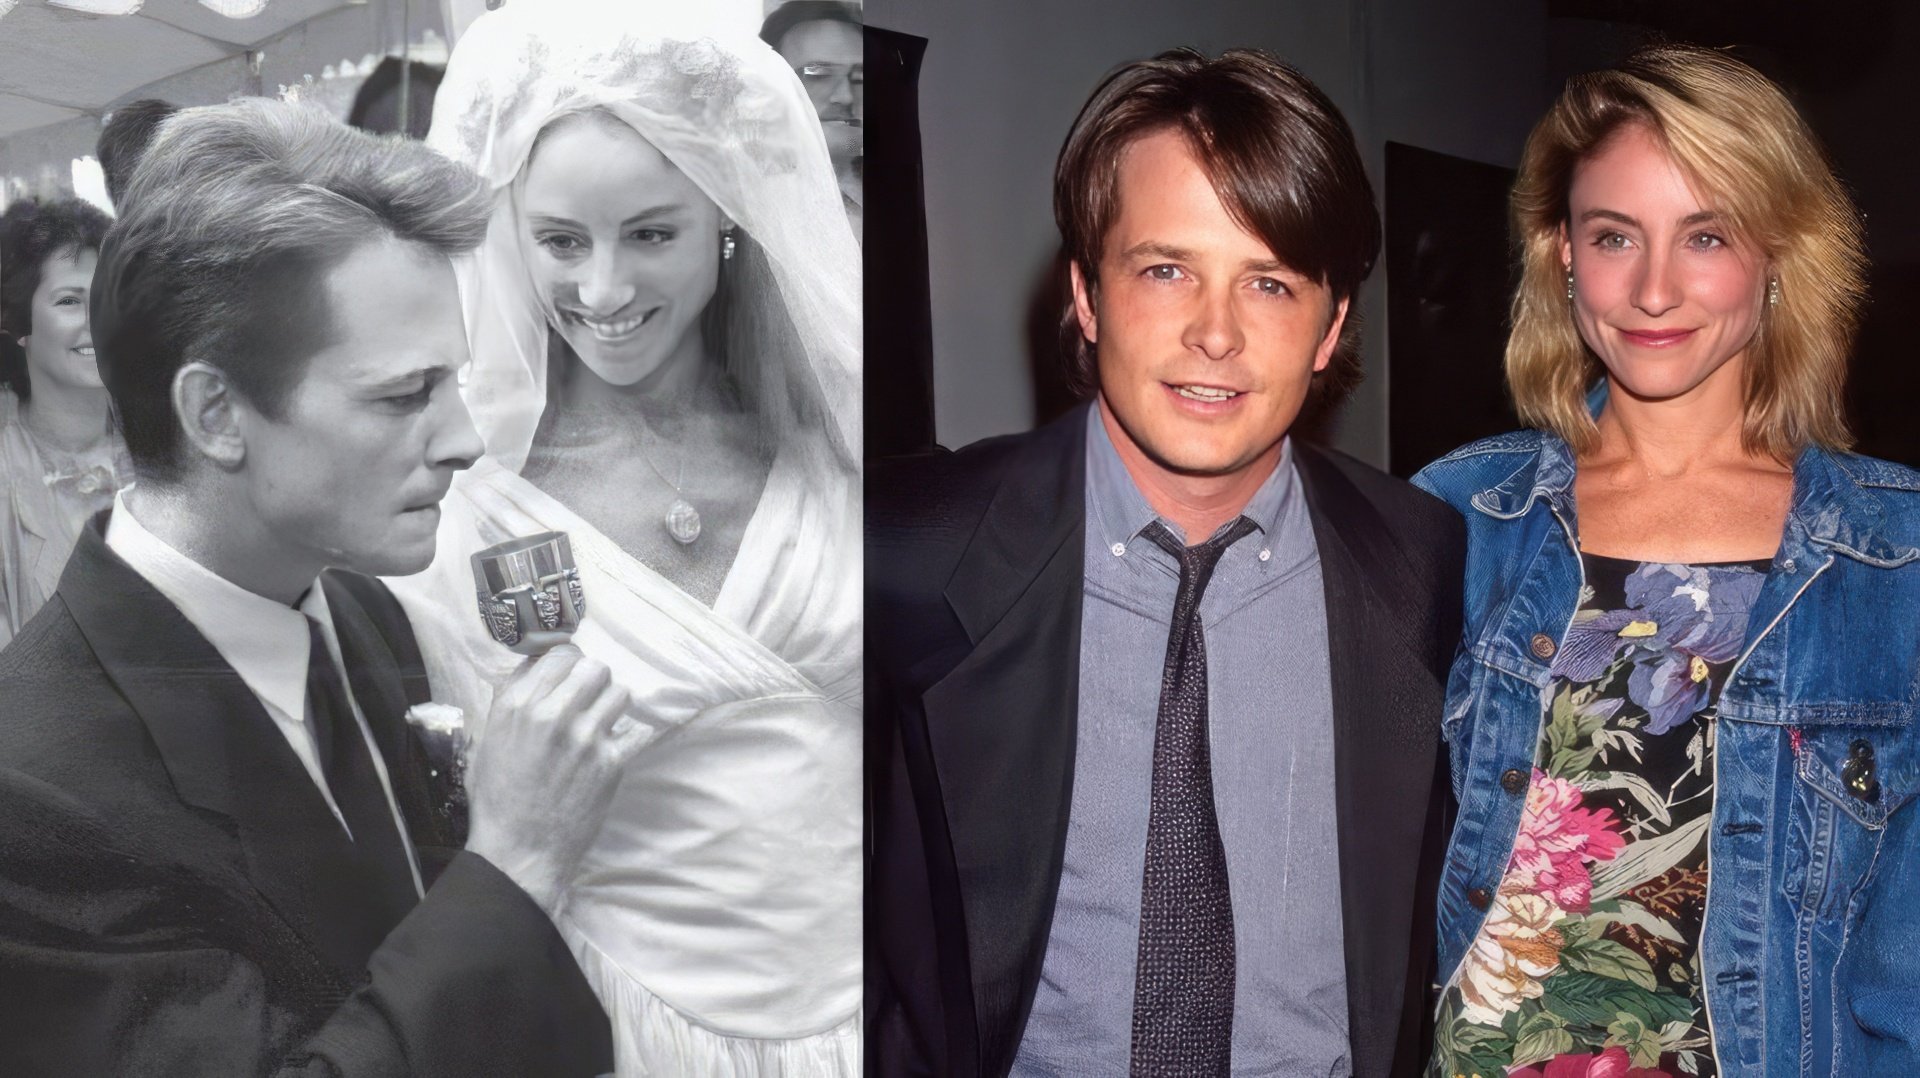 Tracy Pollan and Michael J. Fox in their youth